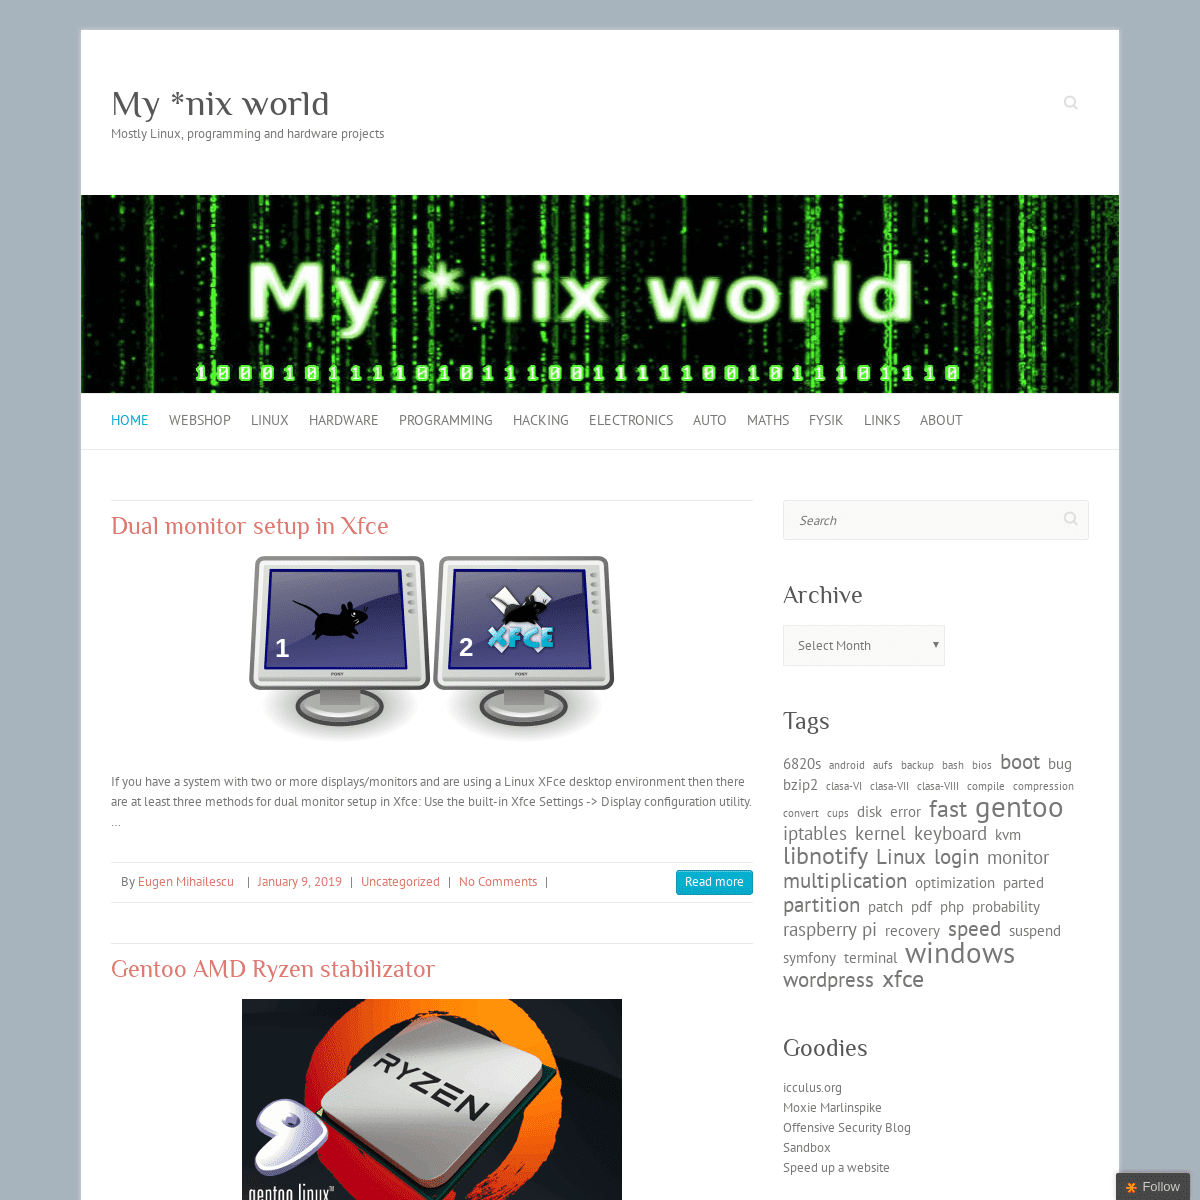 A complete backup of mynixworld.info